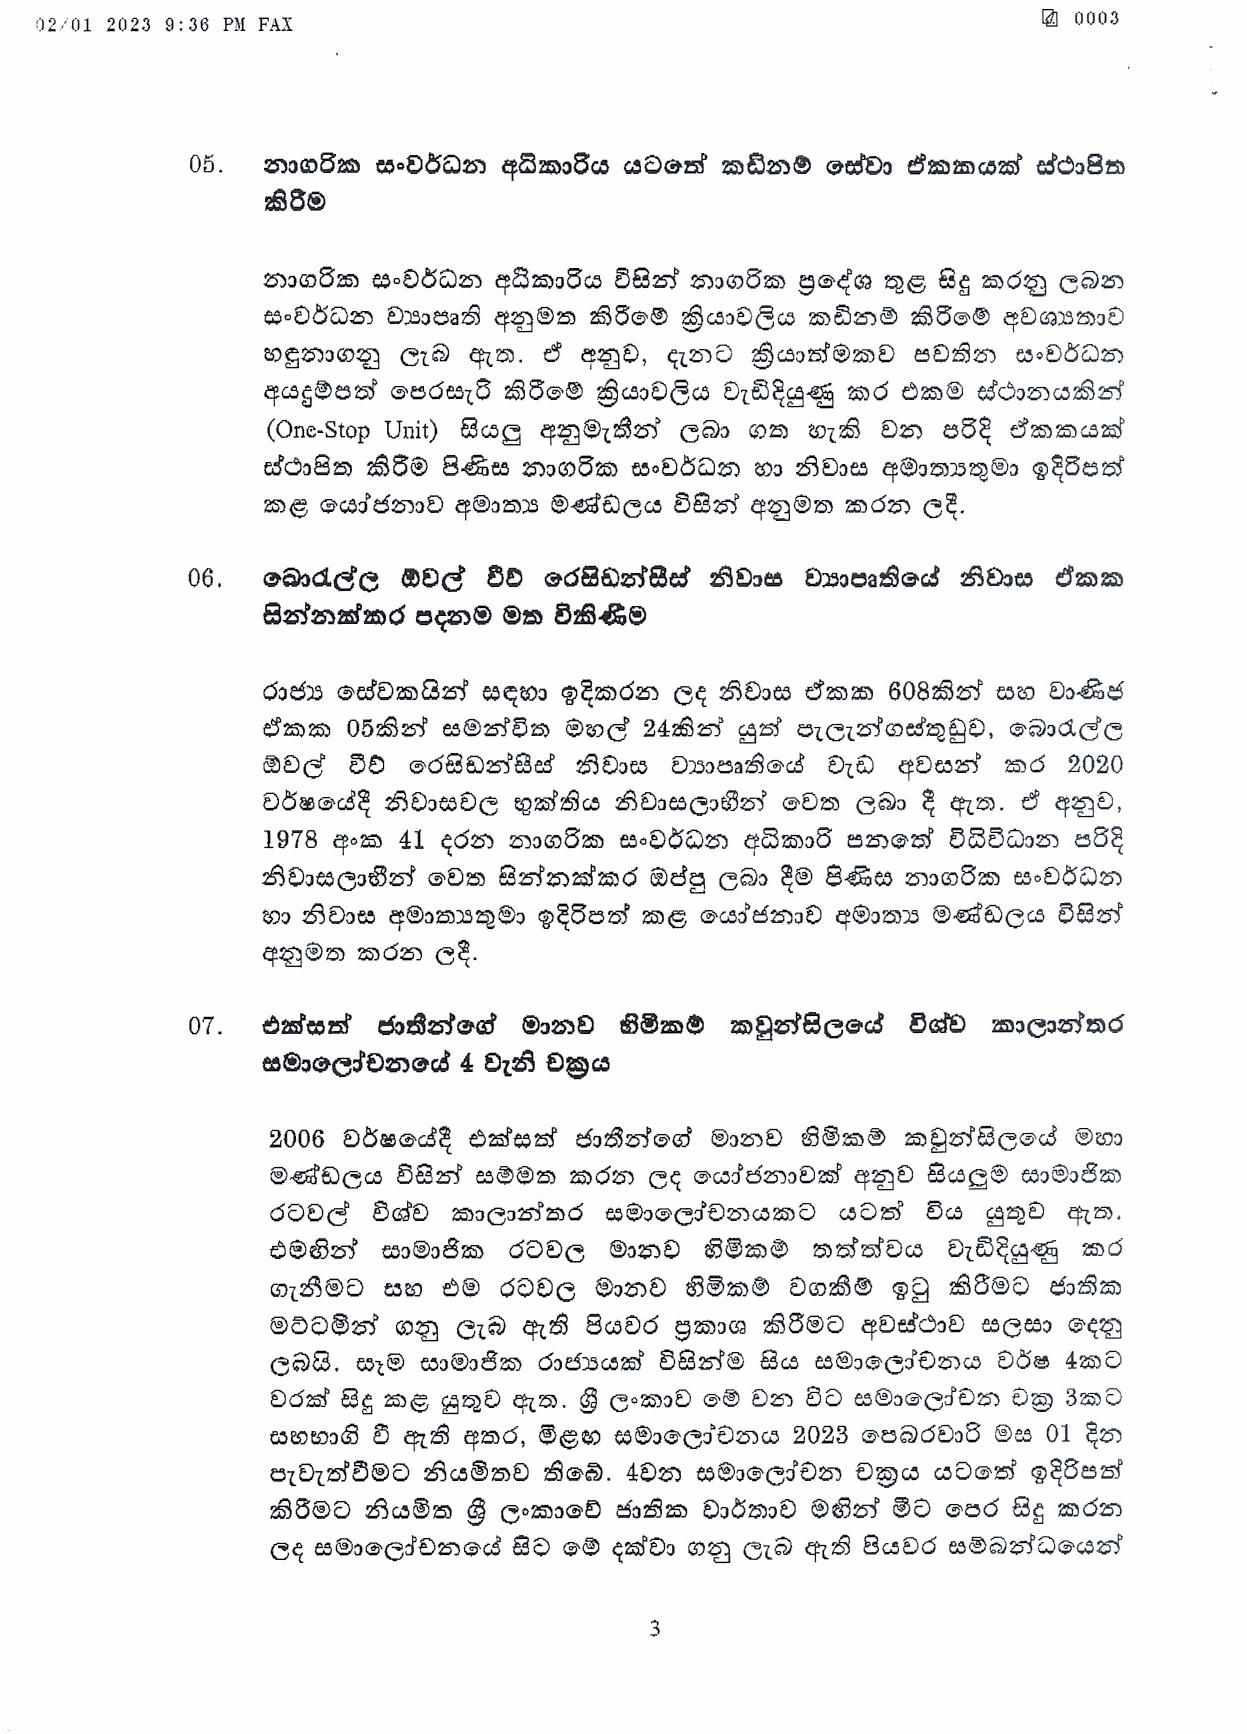 Cabinet Decision on 02.01.2023 page 003